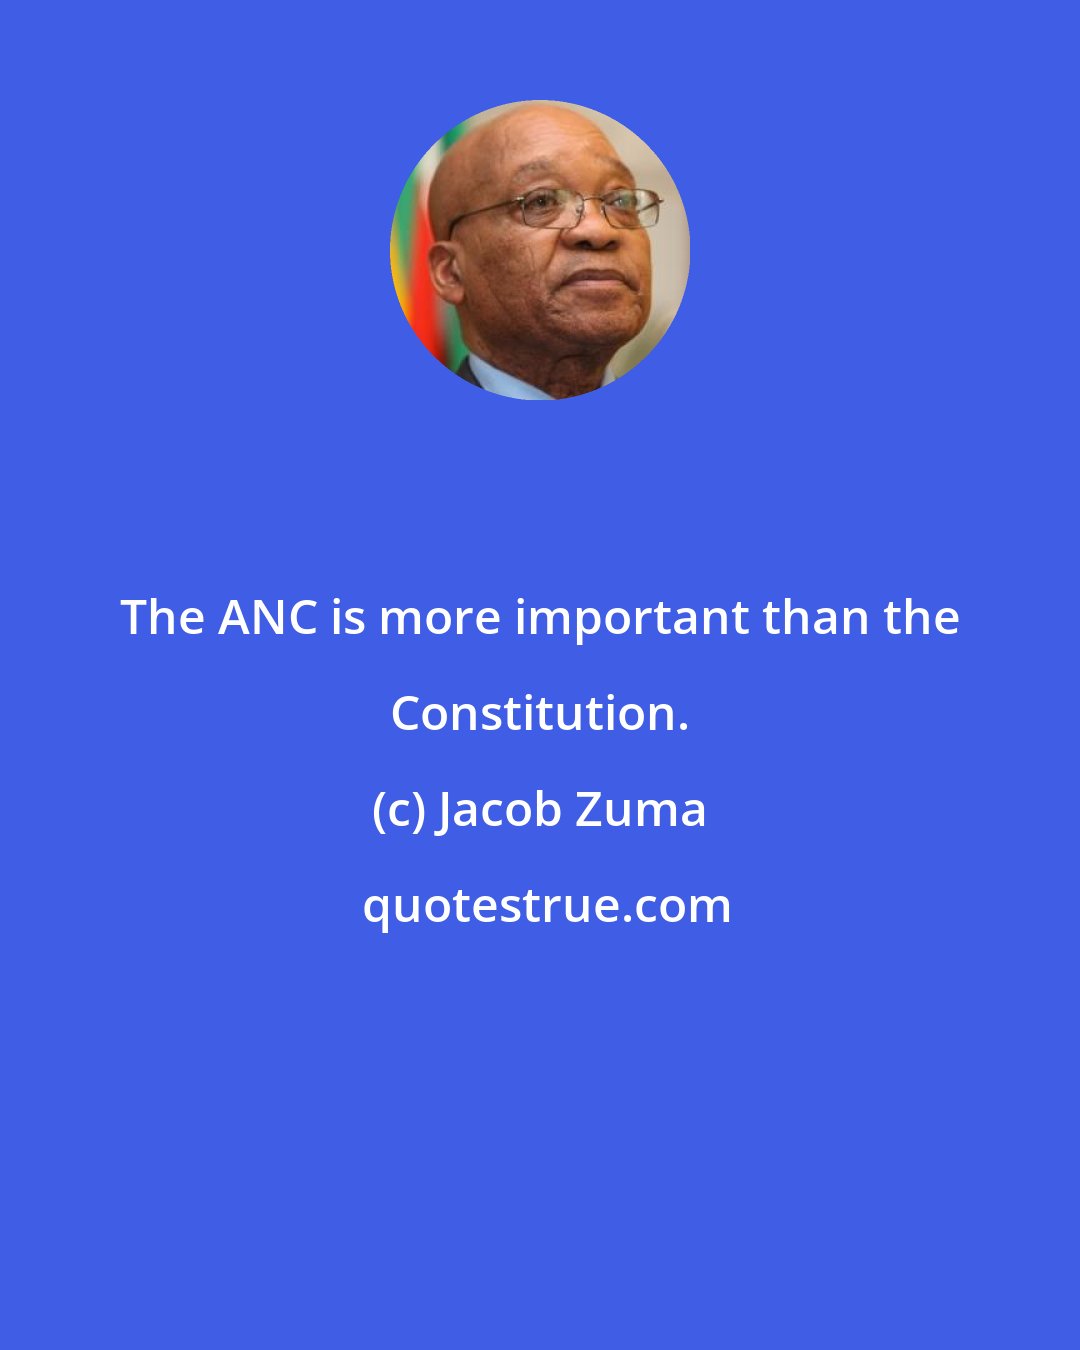 Jacob Zuma: The ANC is more important than the Constitution.